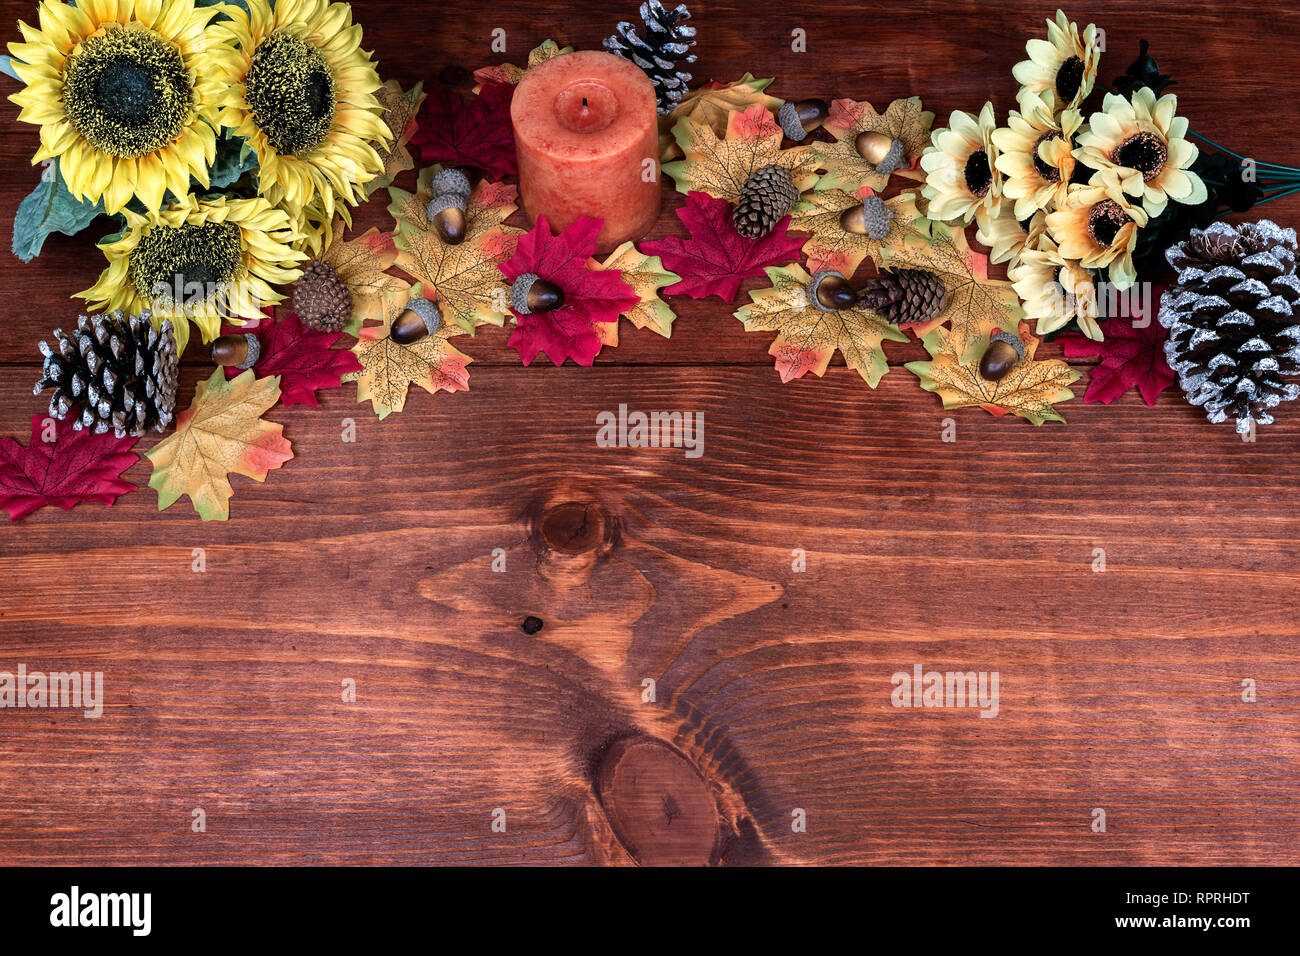 Thanksgiving decor with candle, frosted pine cones, sunflowers, acorns and maple leaves Stock Photo